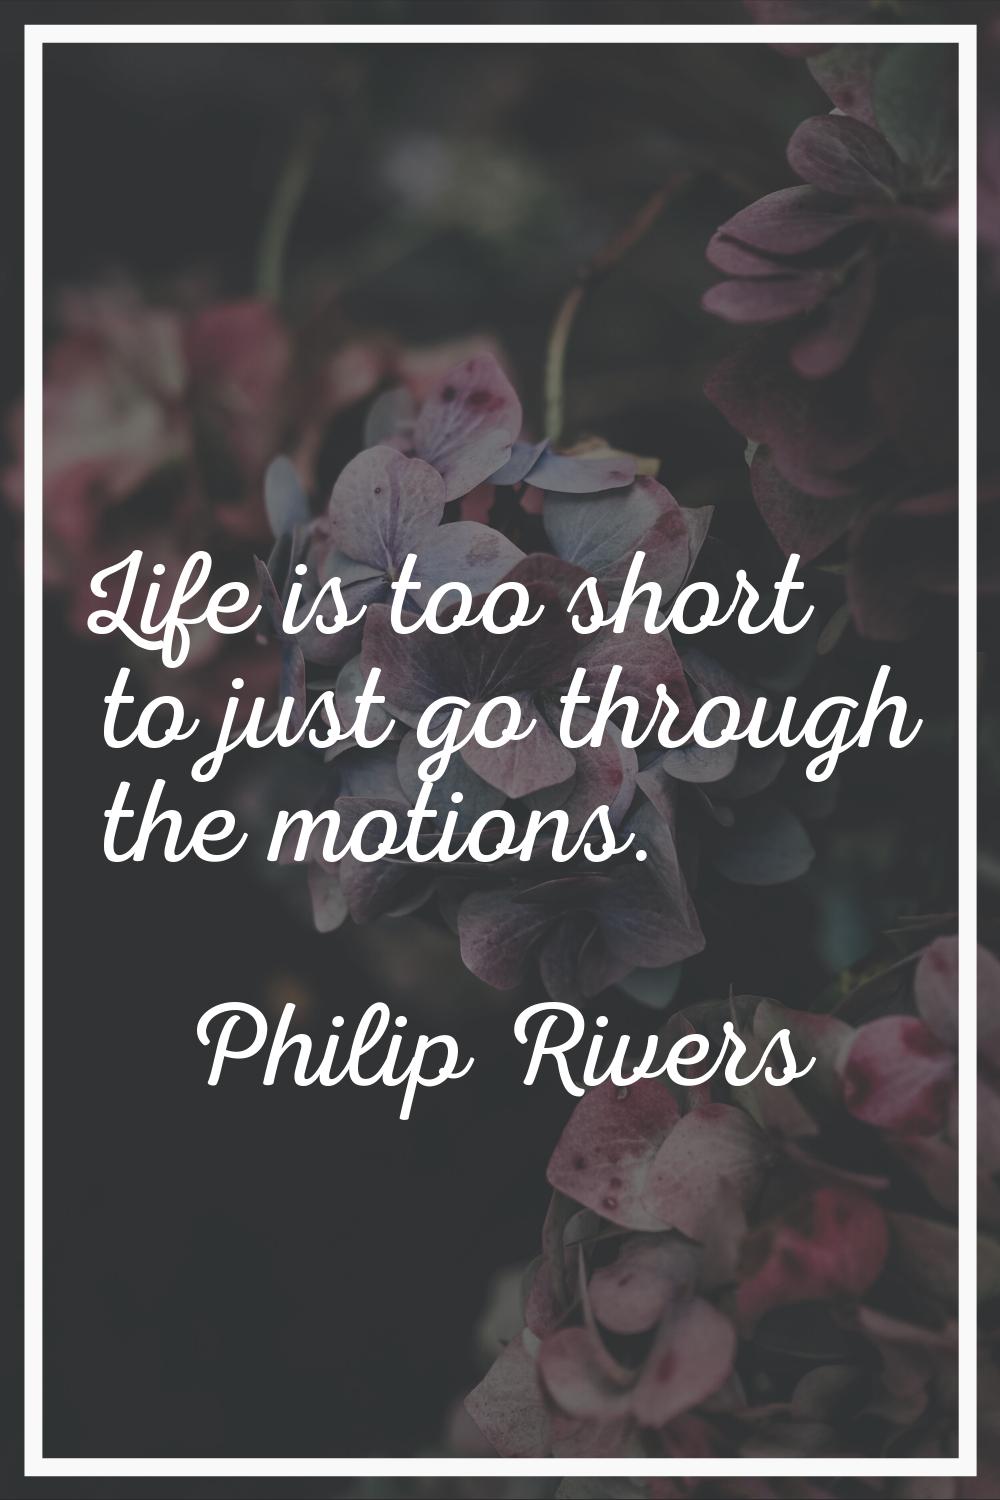 Life is too short to just go through the motions.